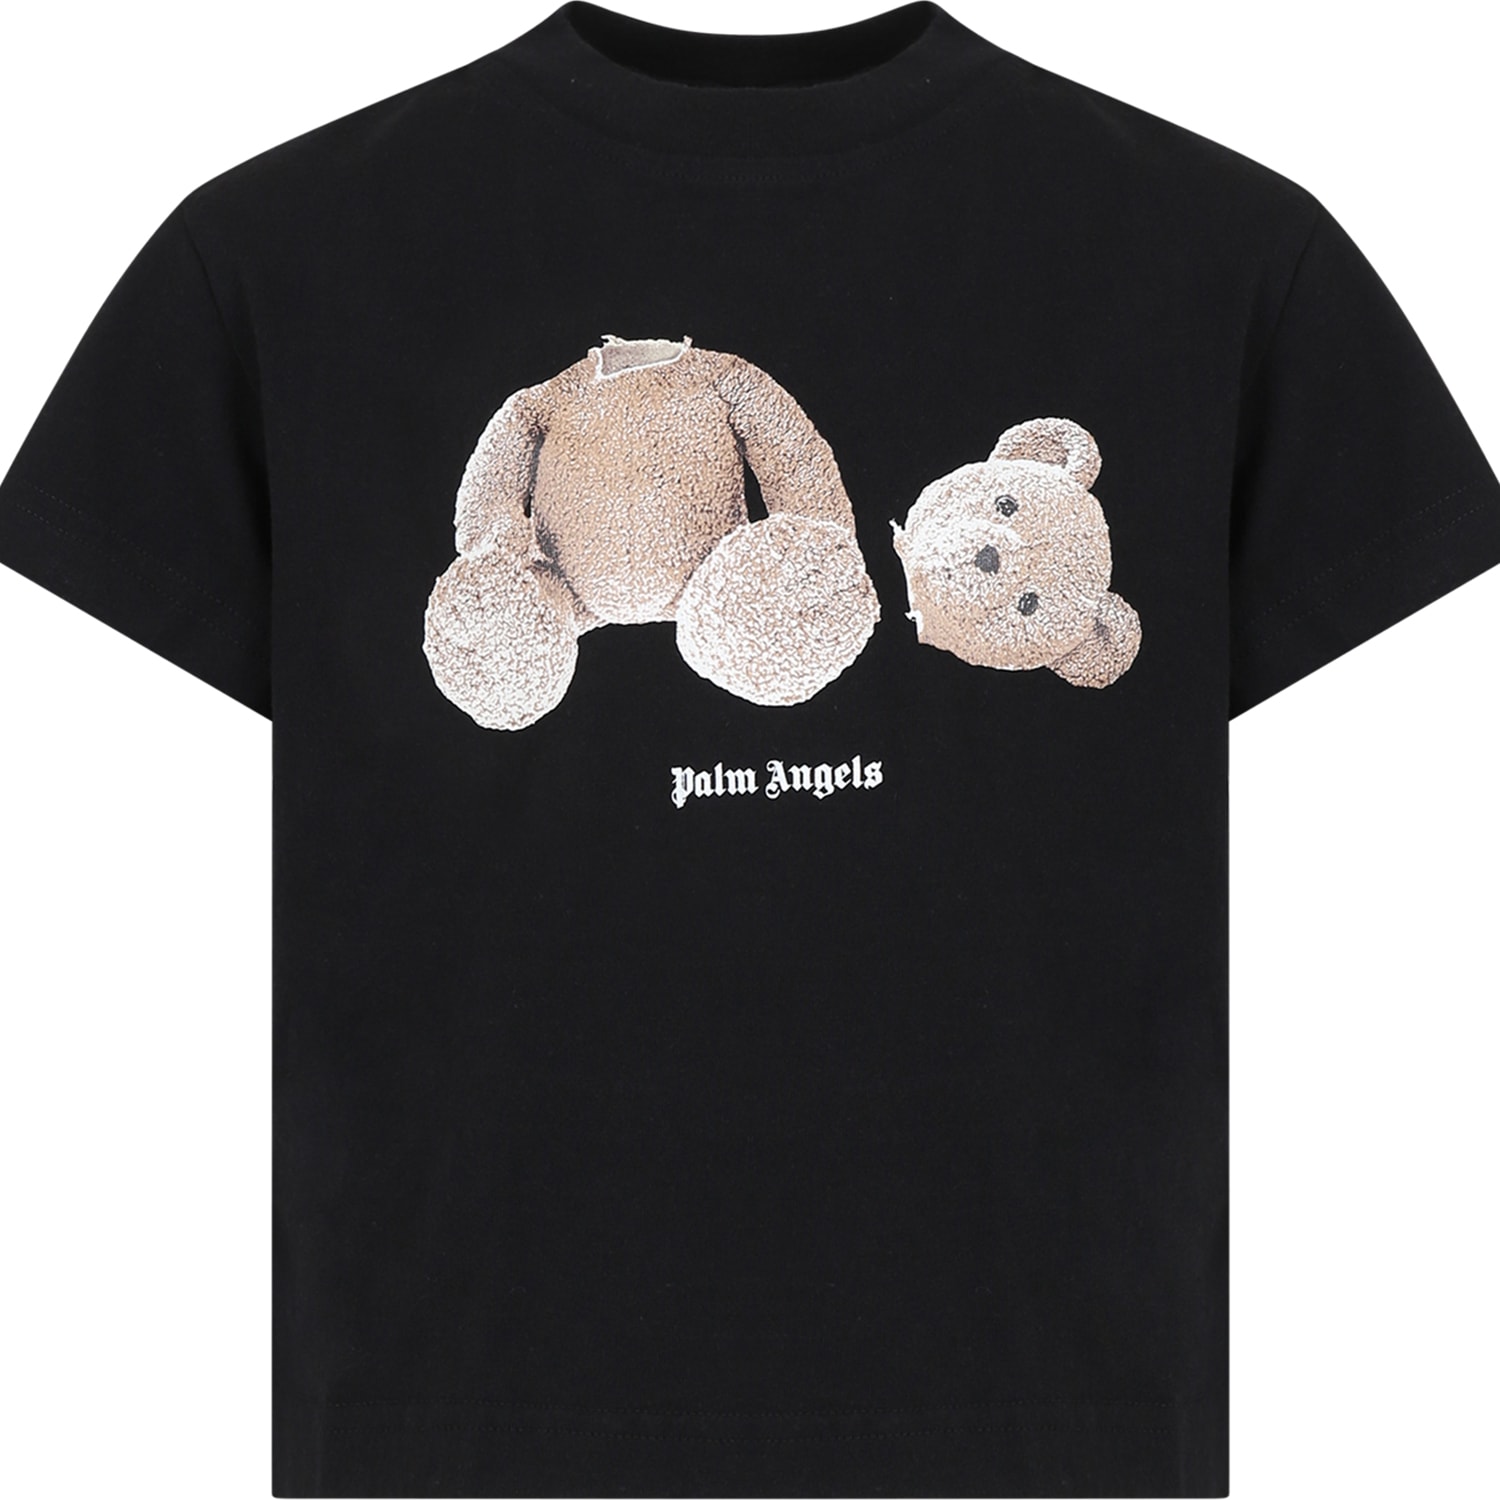 Palm Angels Black T-shirt For Kids With Bear